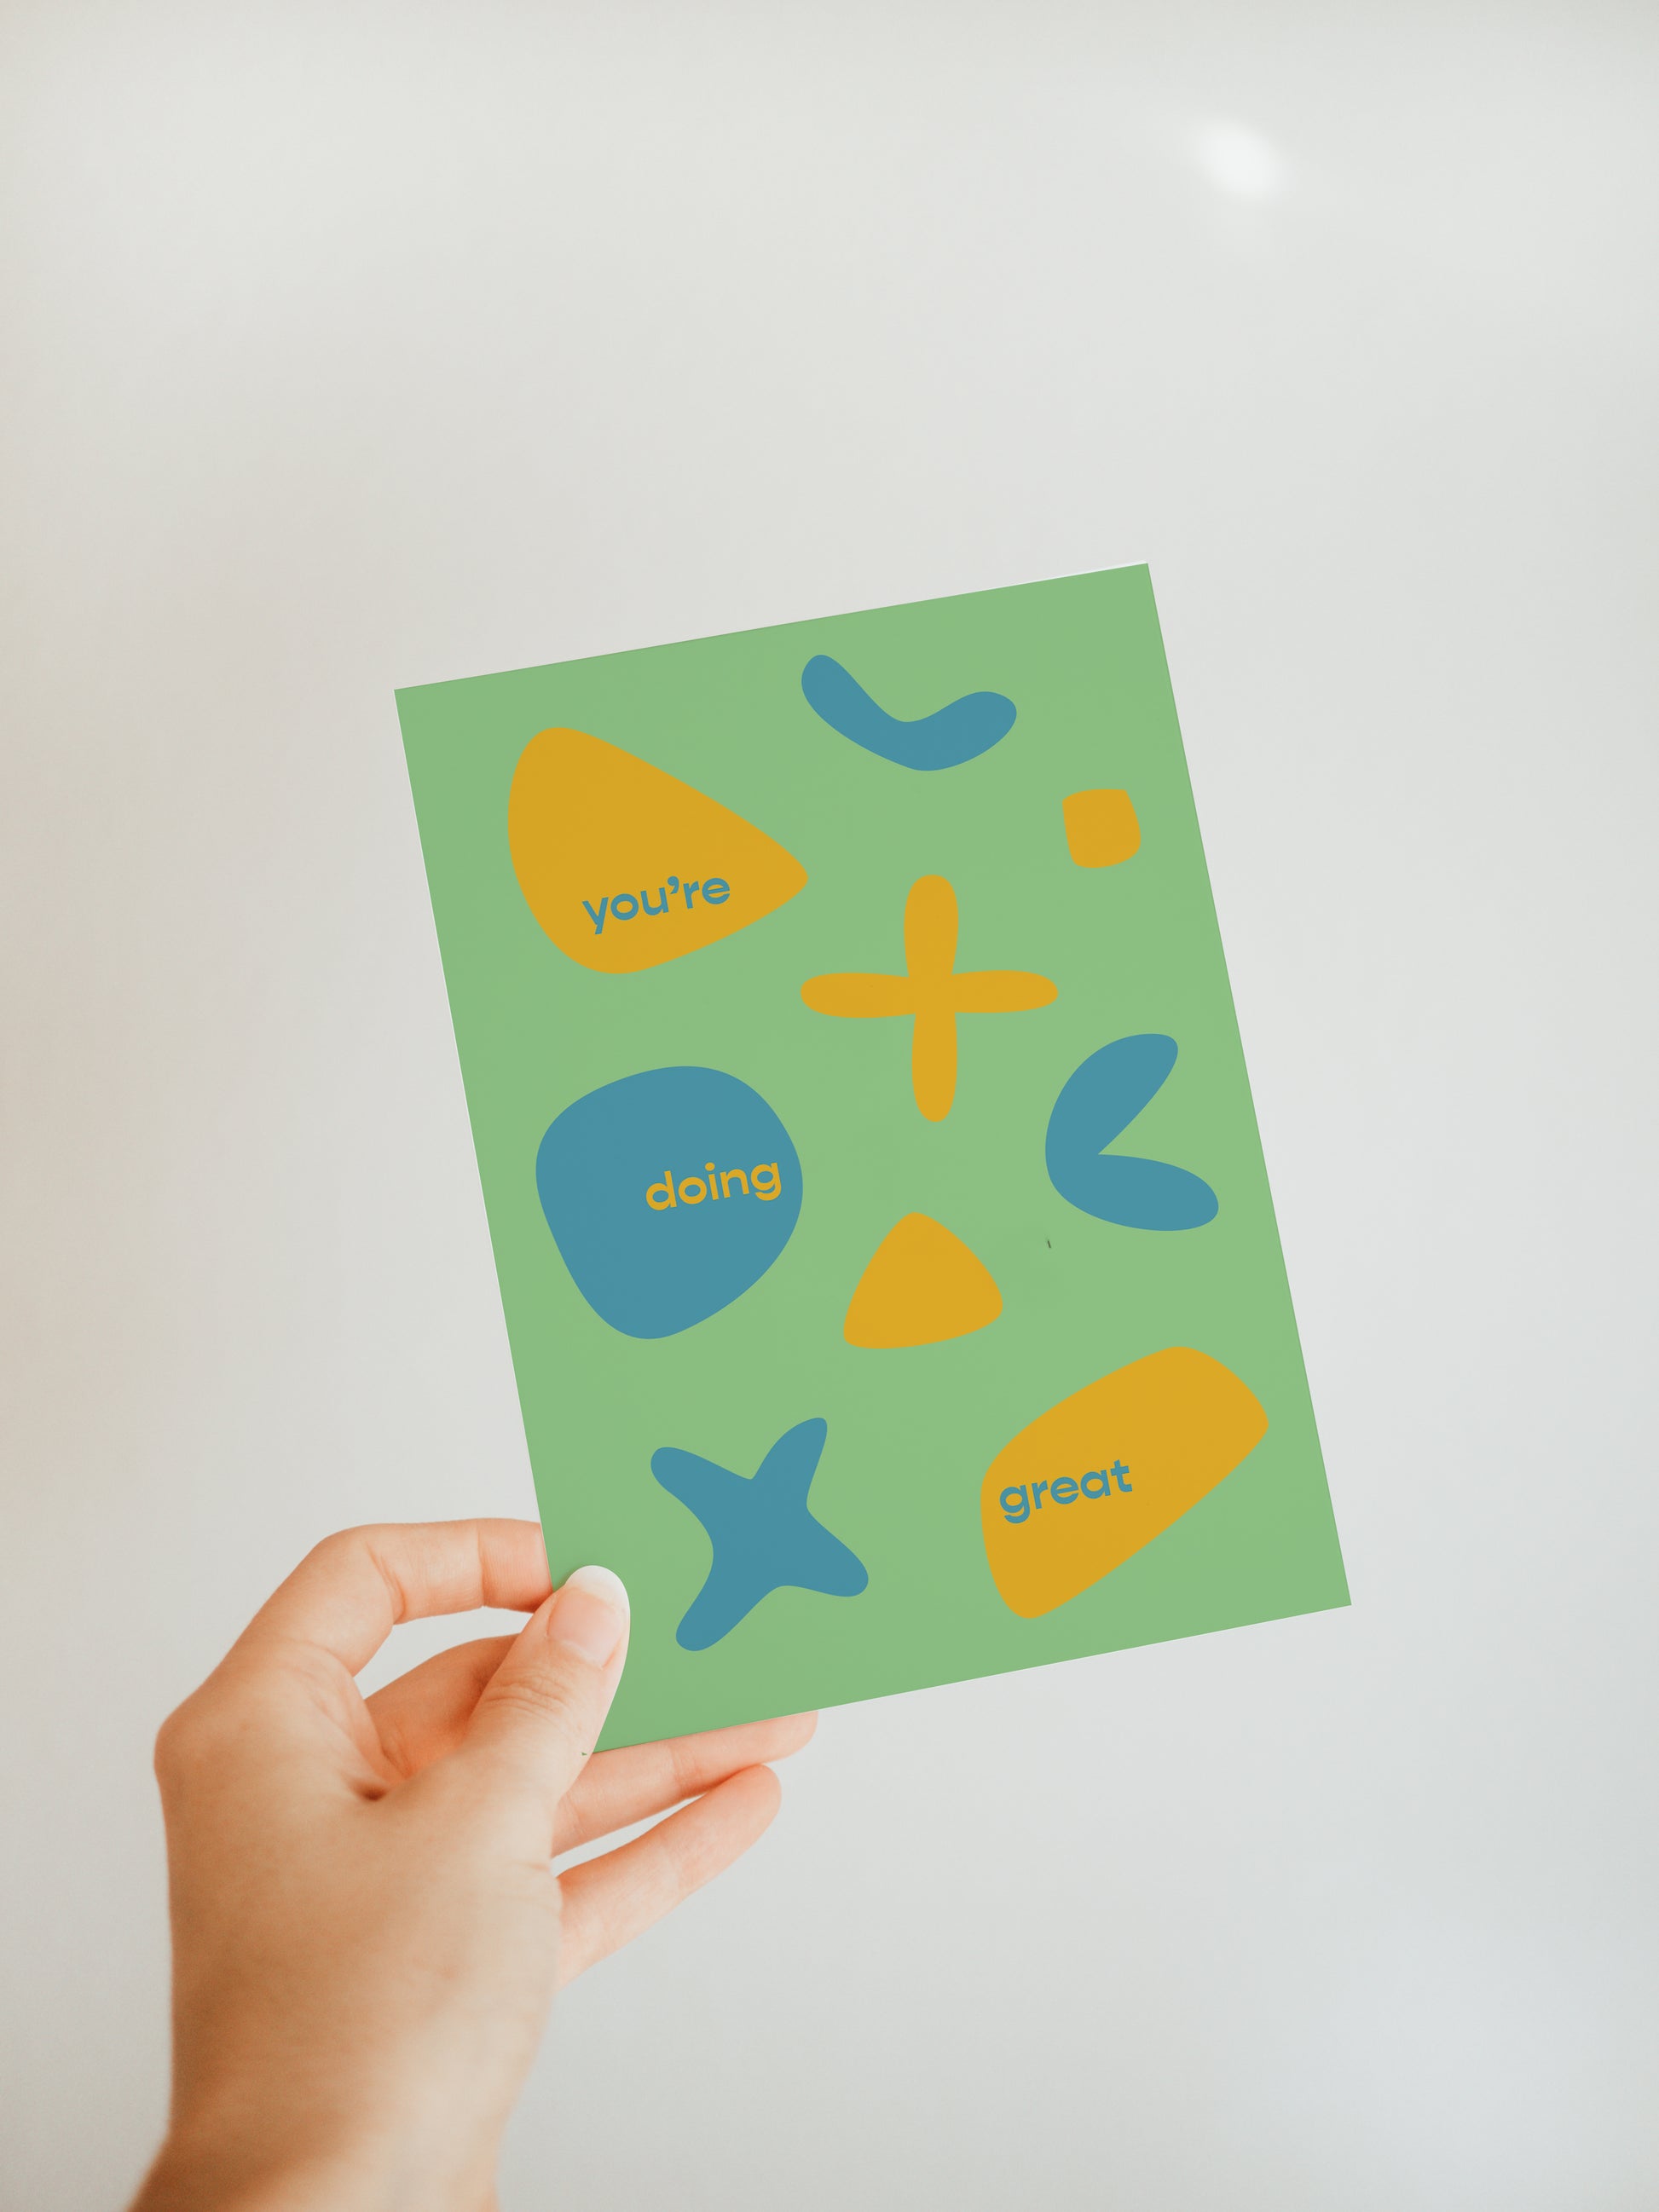 hand holding a green greeting card with the words "you're doing great" and abstract designs in yellow and blue